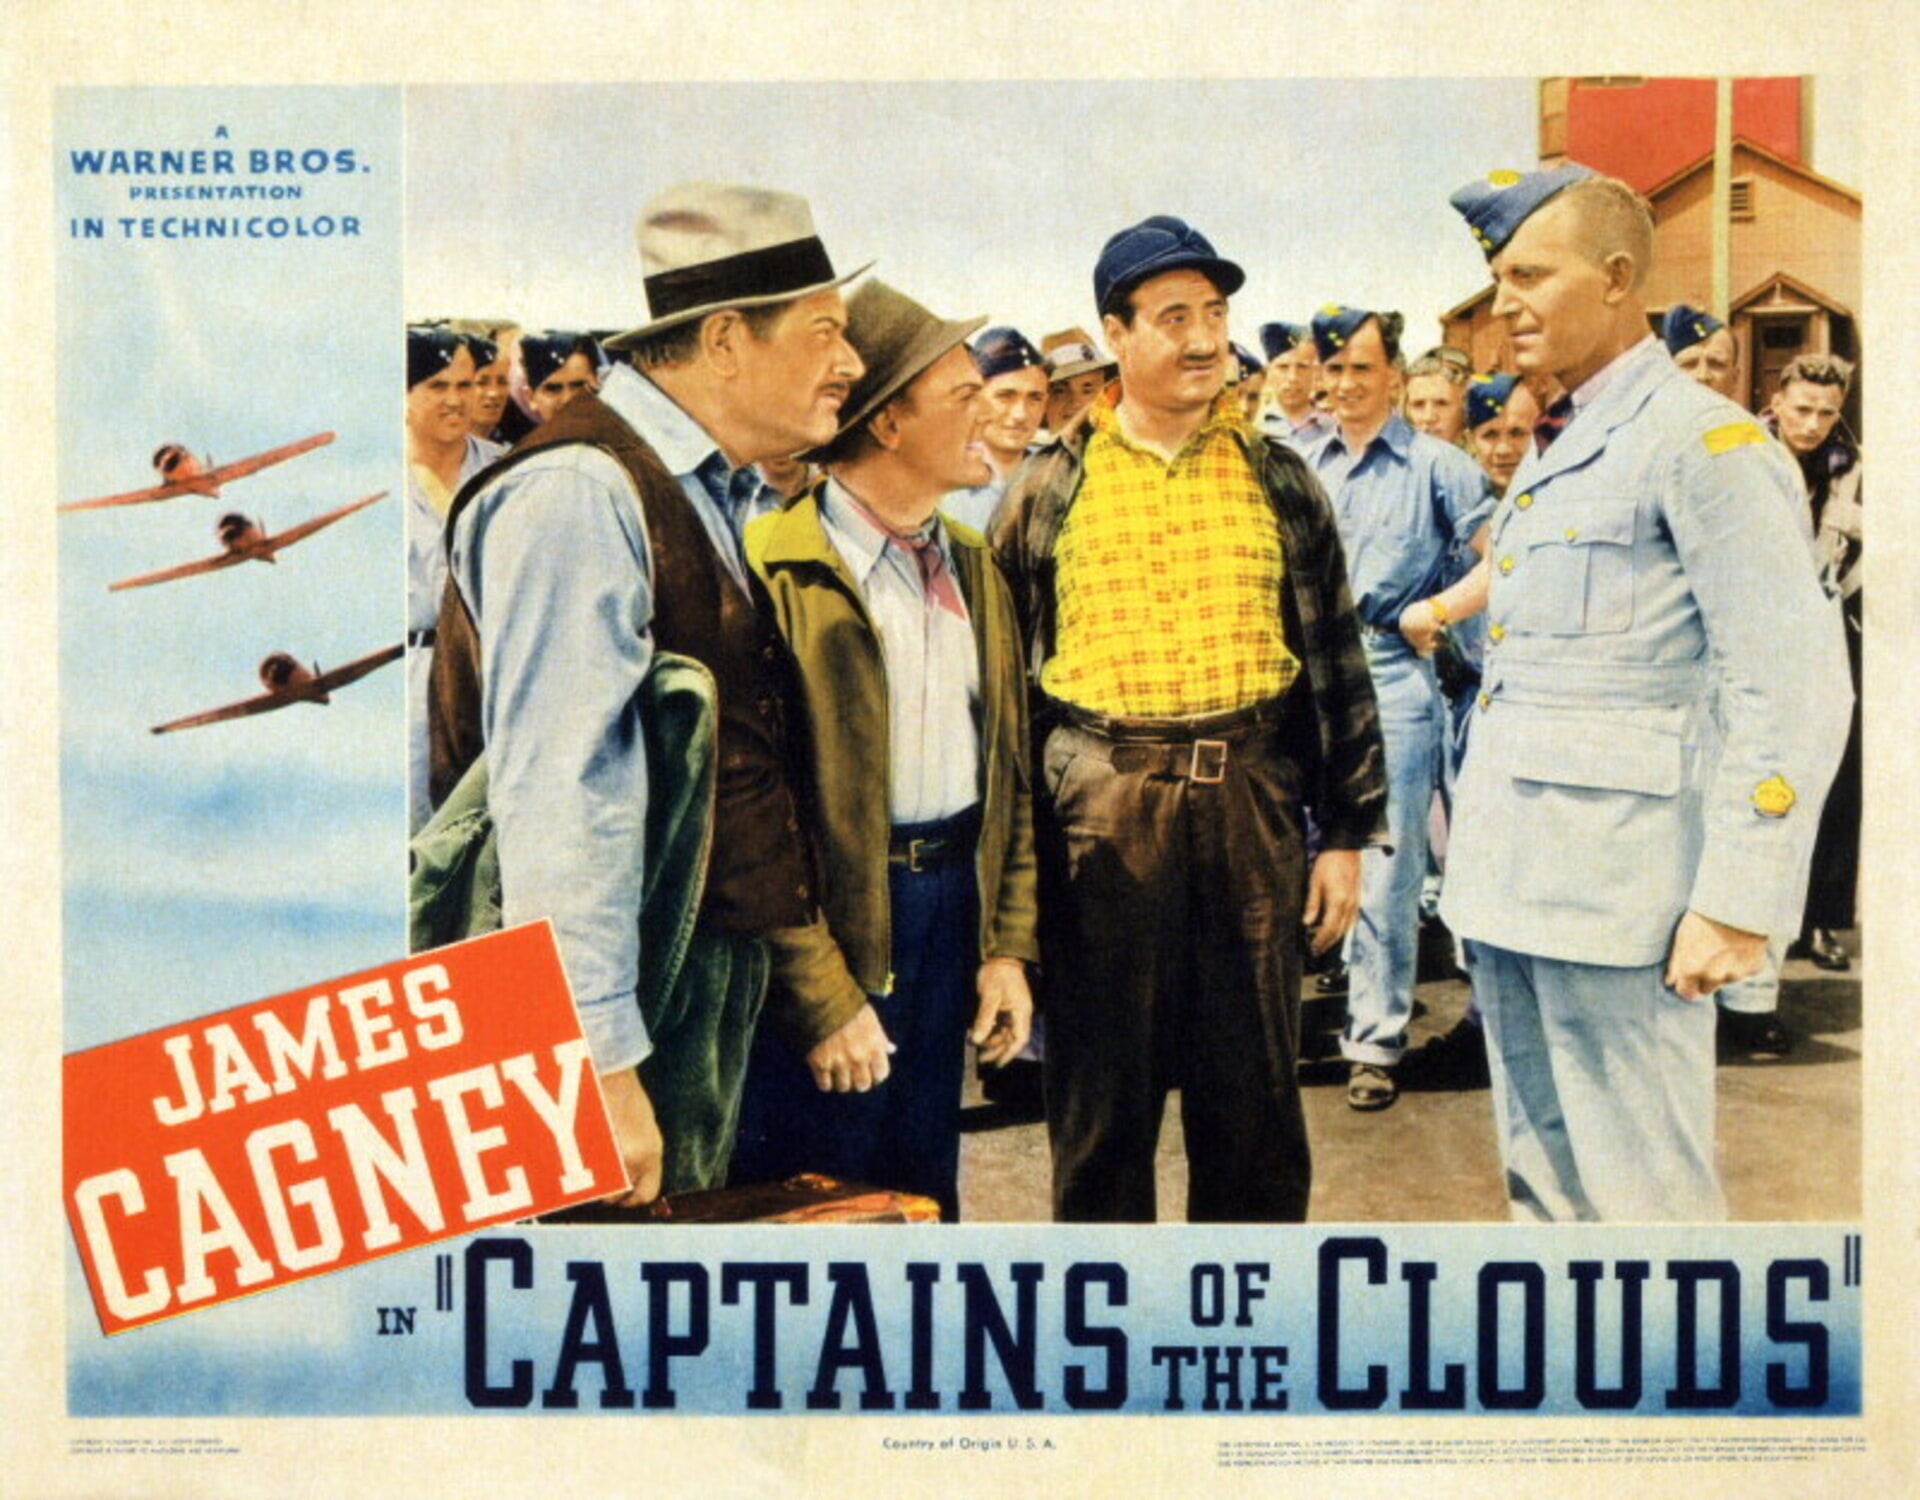 WarnerBros.com | Captains of the Clouds | Movies